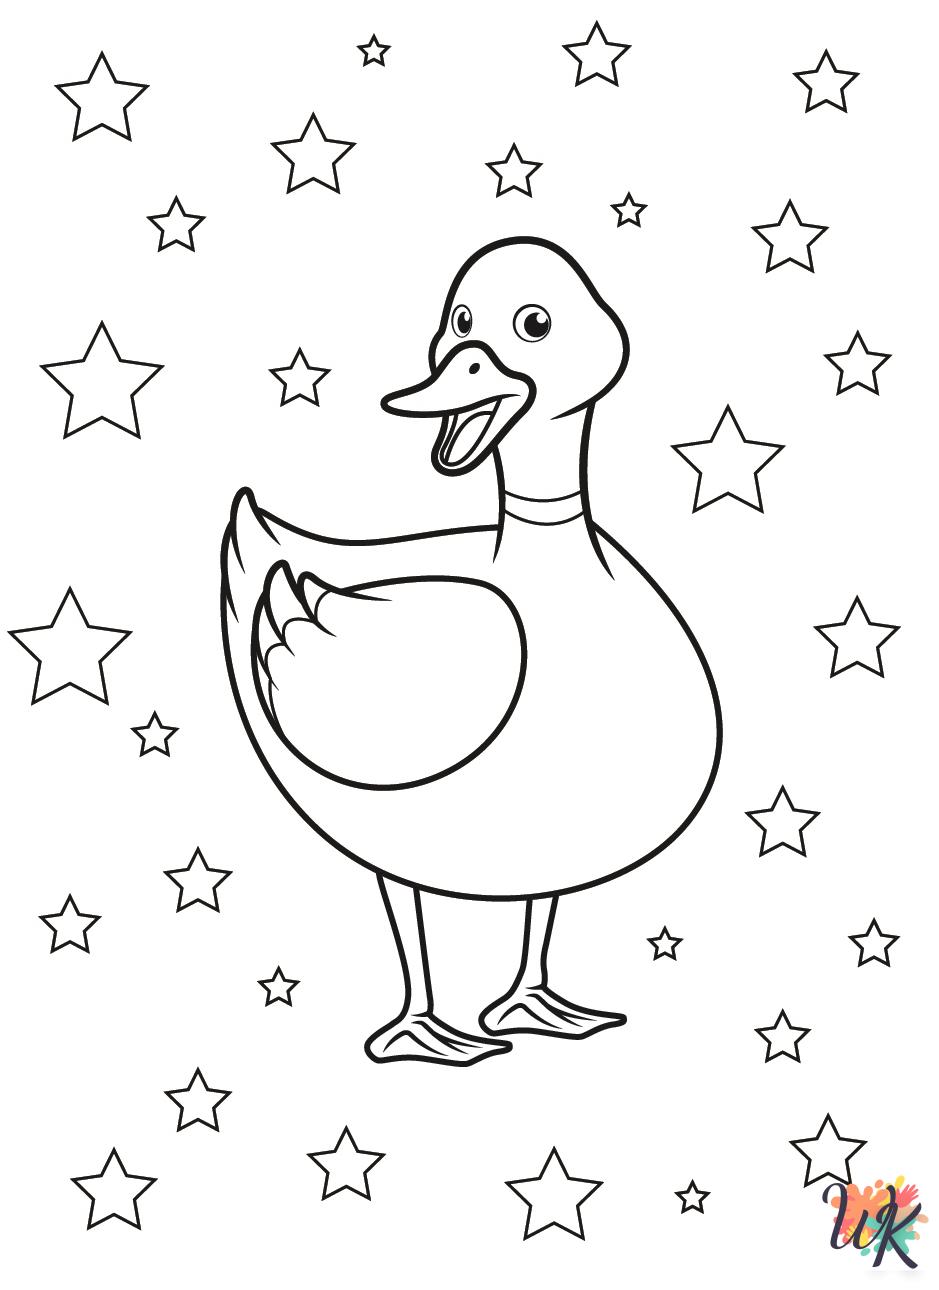 Ducks coloring pages grinch